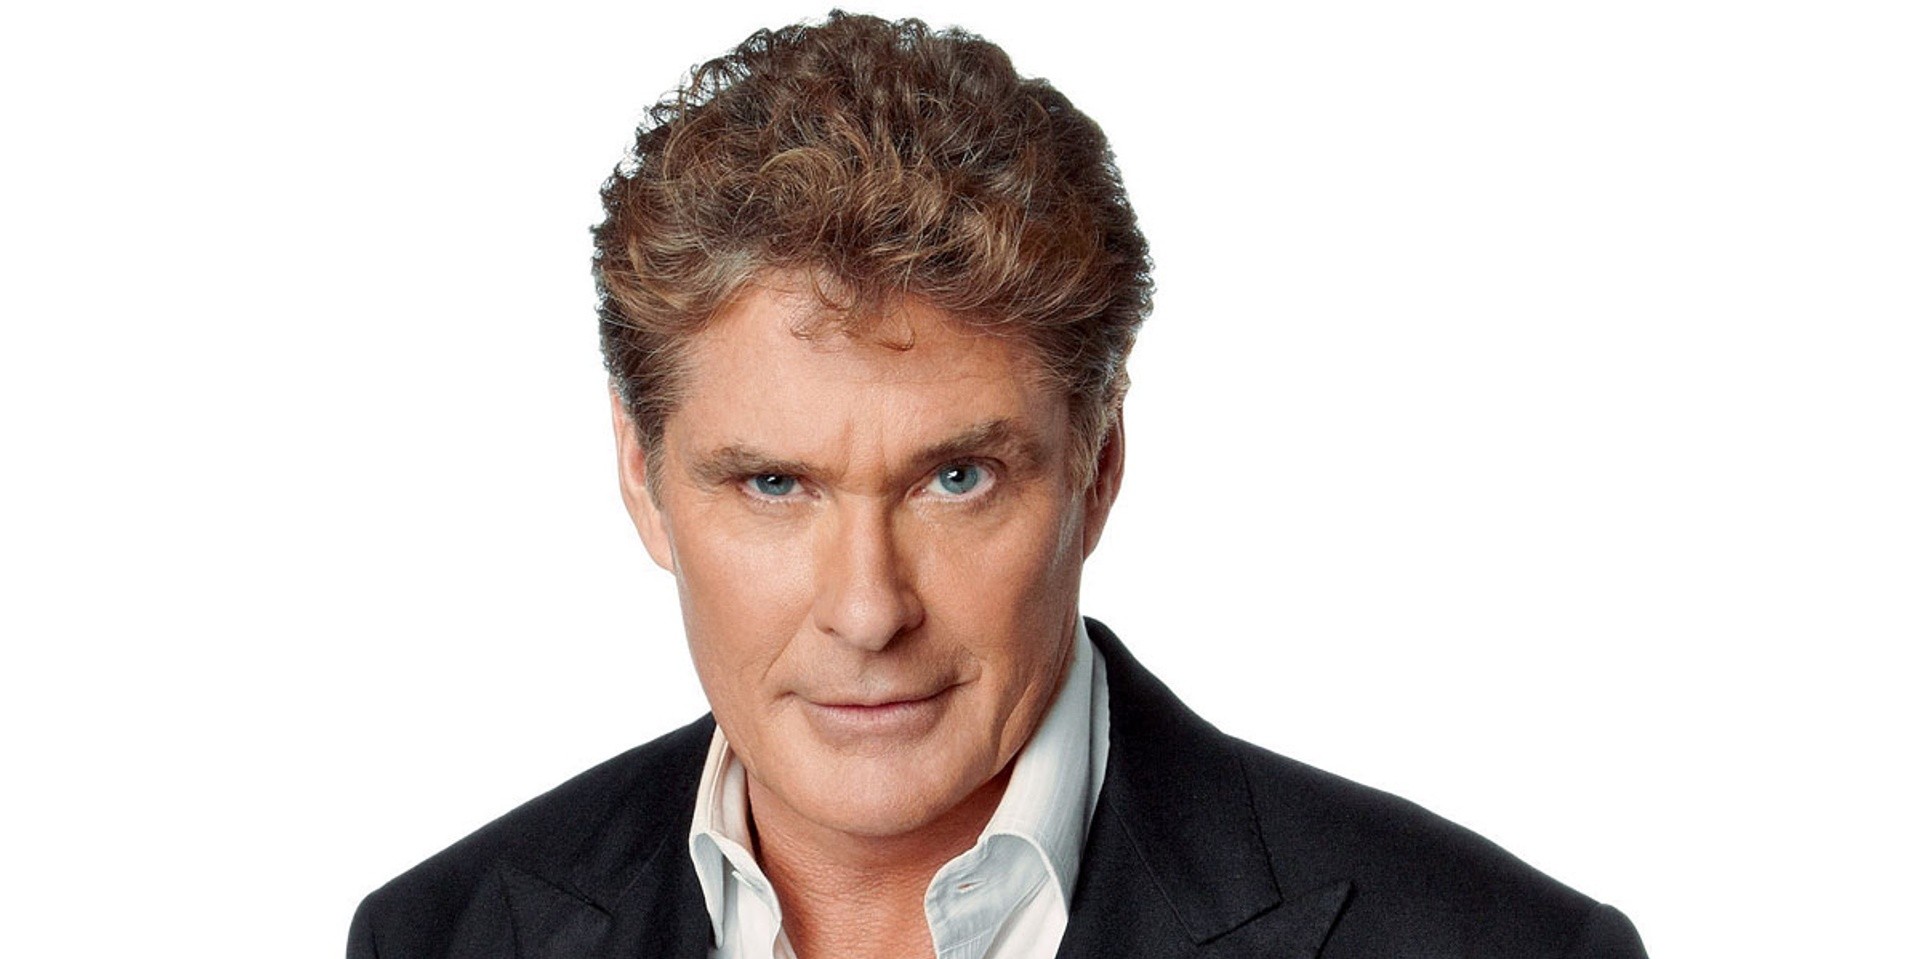 Sail with David Hasselhoff on this year's It's The Ship 